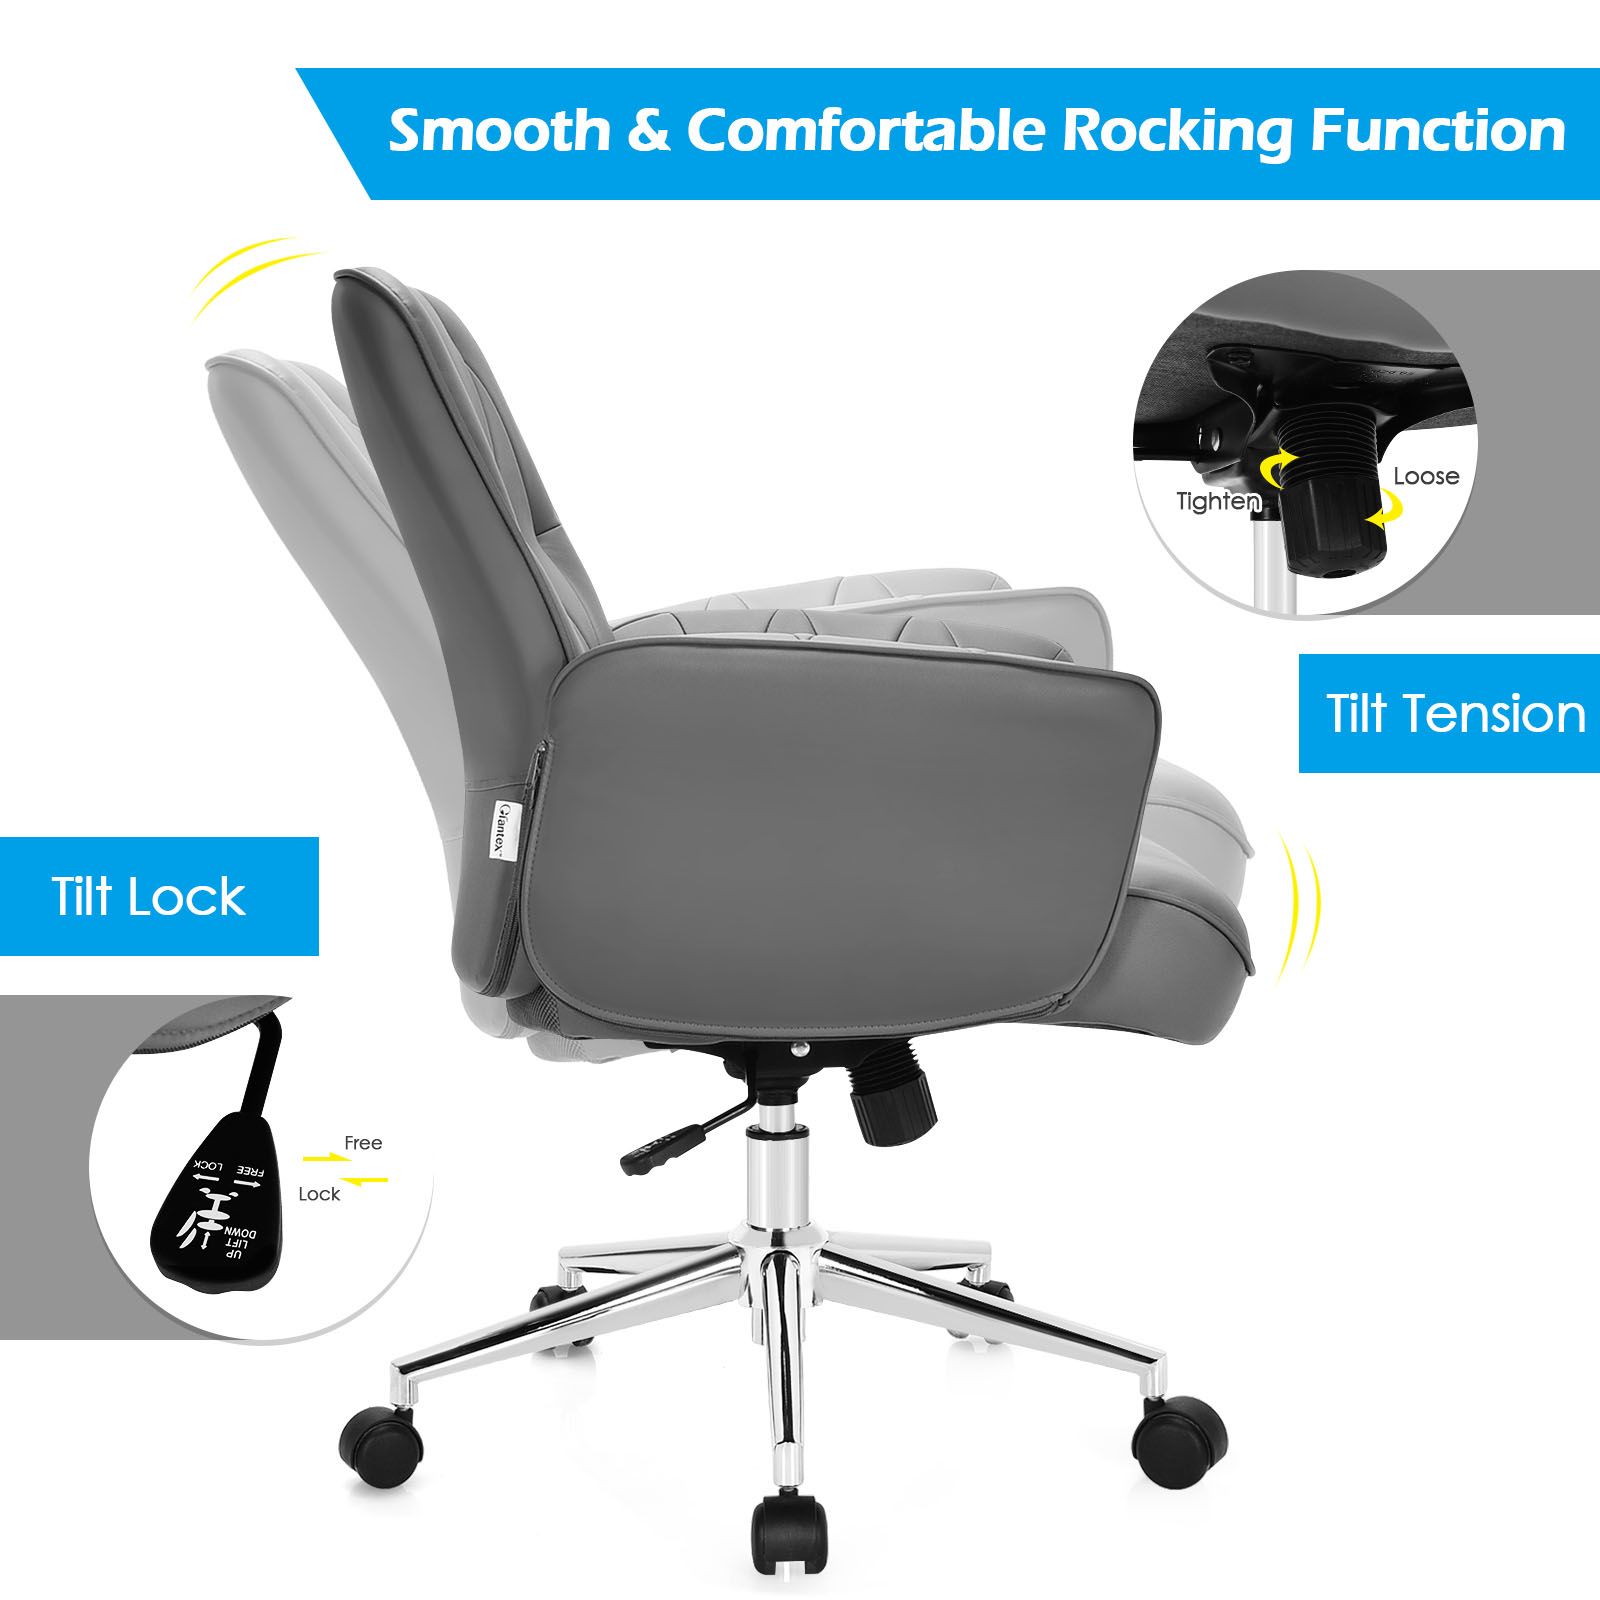 Adjustable Swivel PU Leather Office Chair with Rocking Function